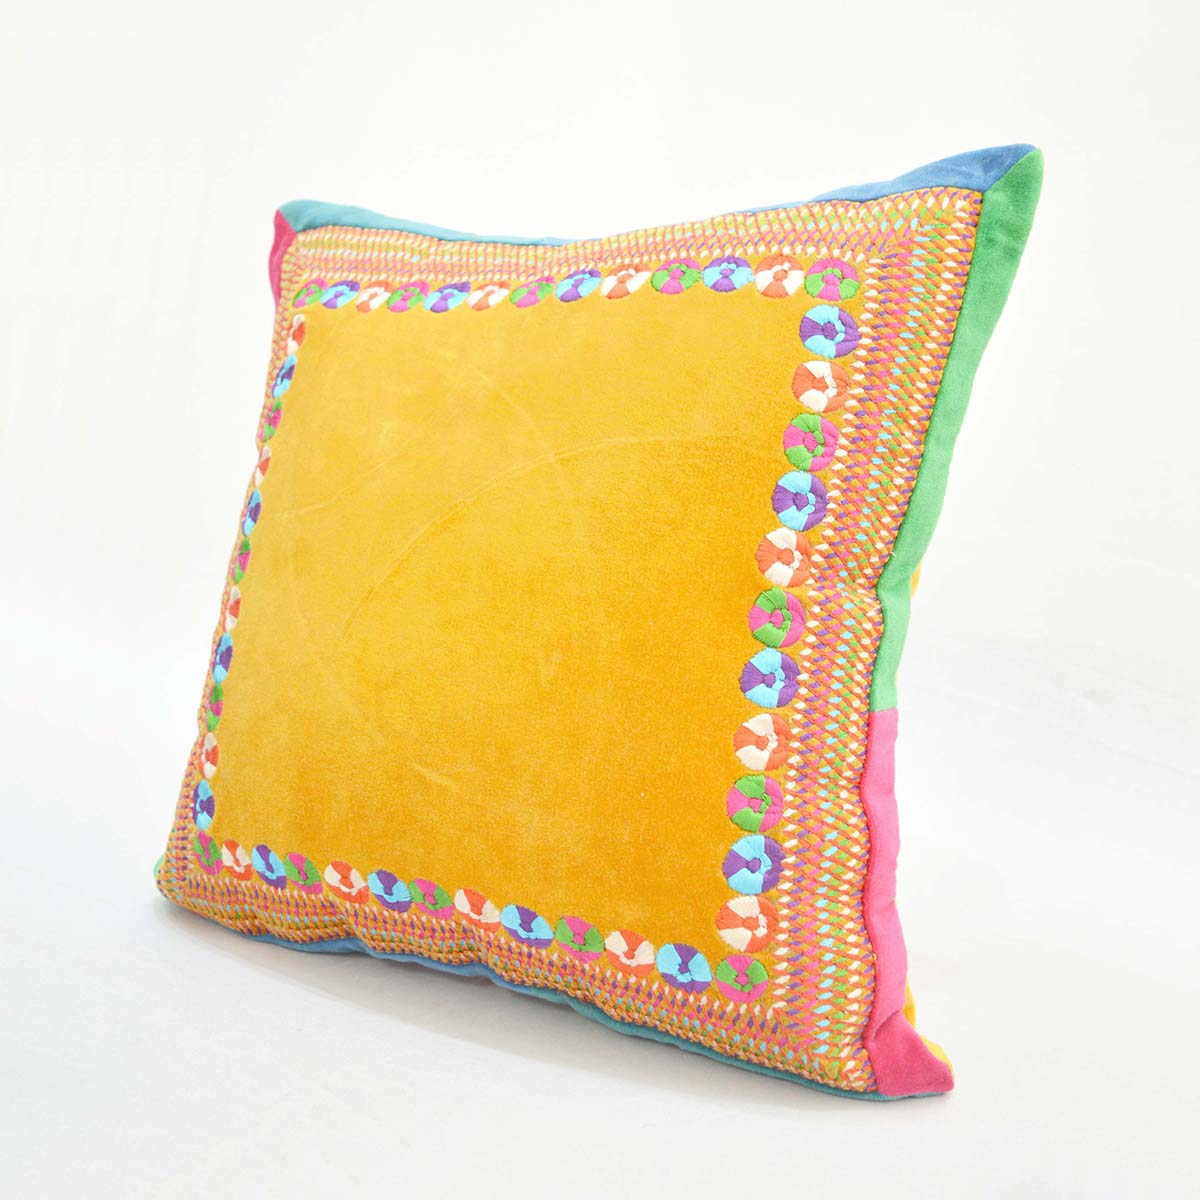 Carnival - Yellow pillow cover, multicolour hand embroidery, bohemian decor cushion cover